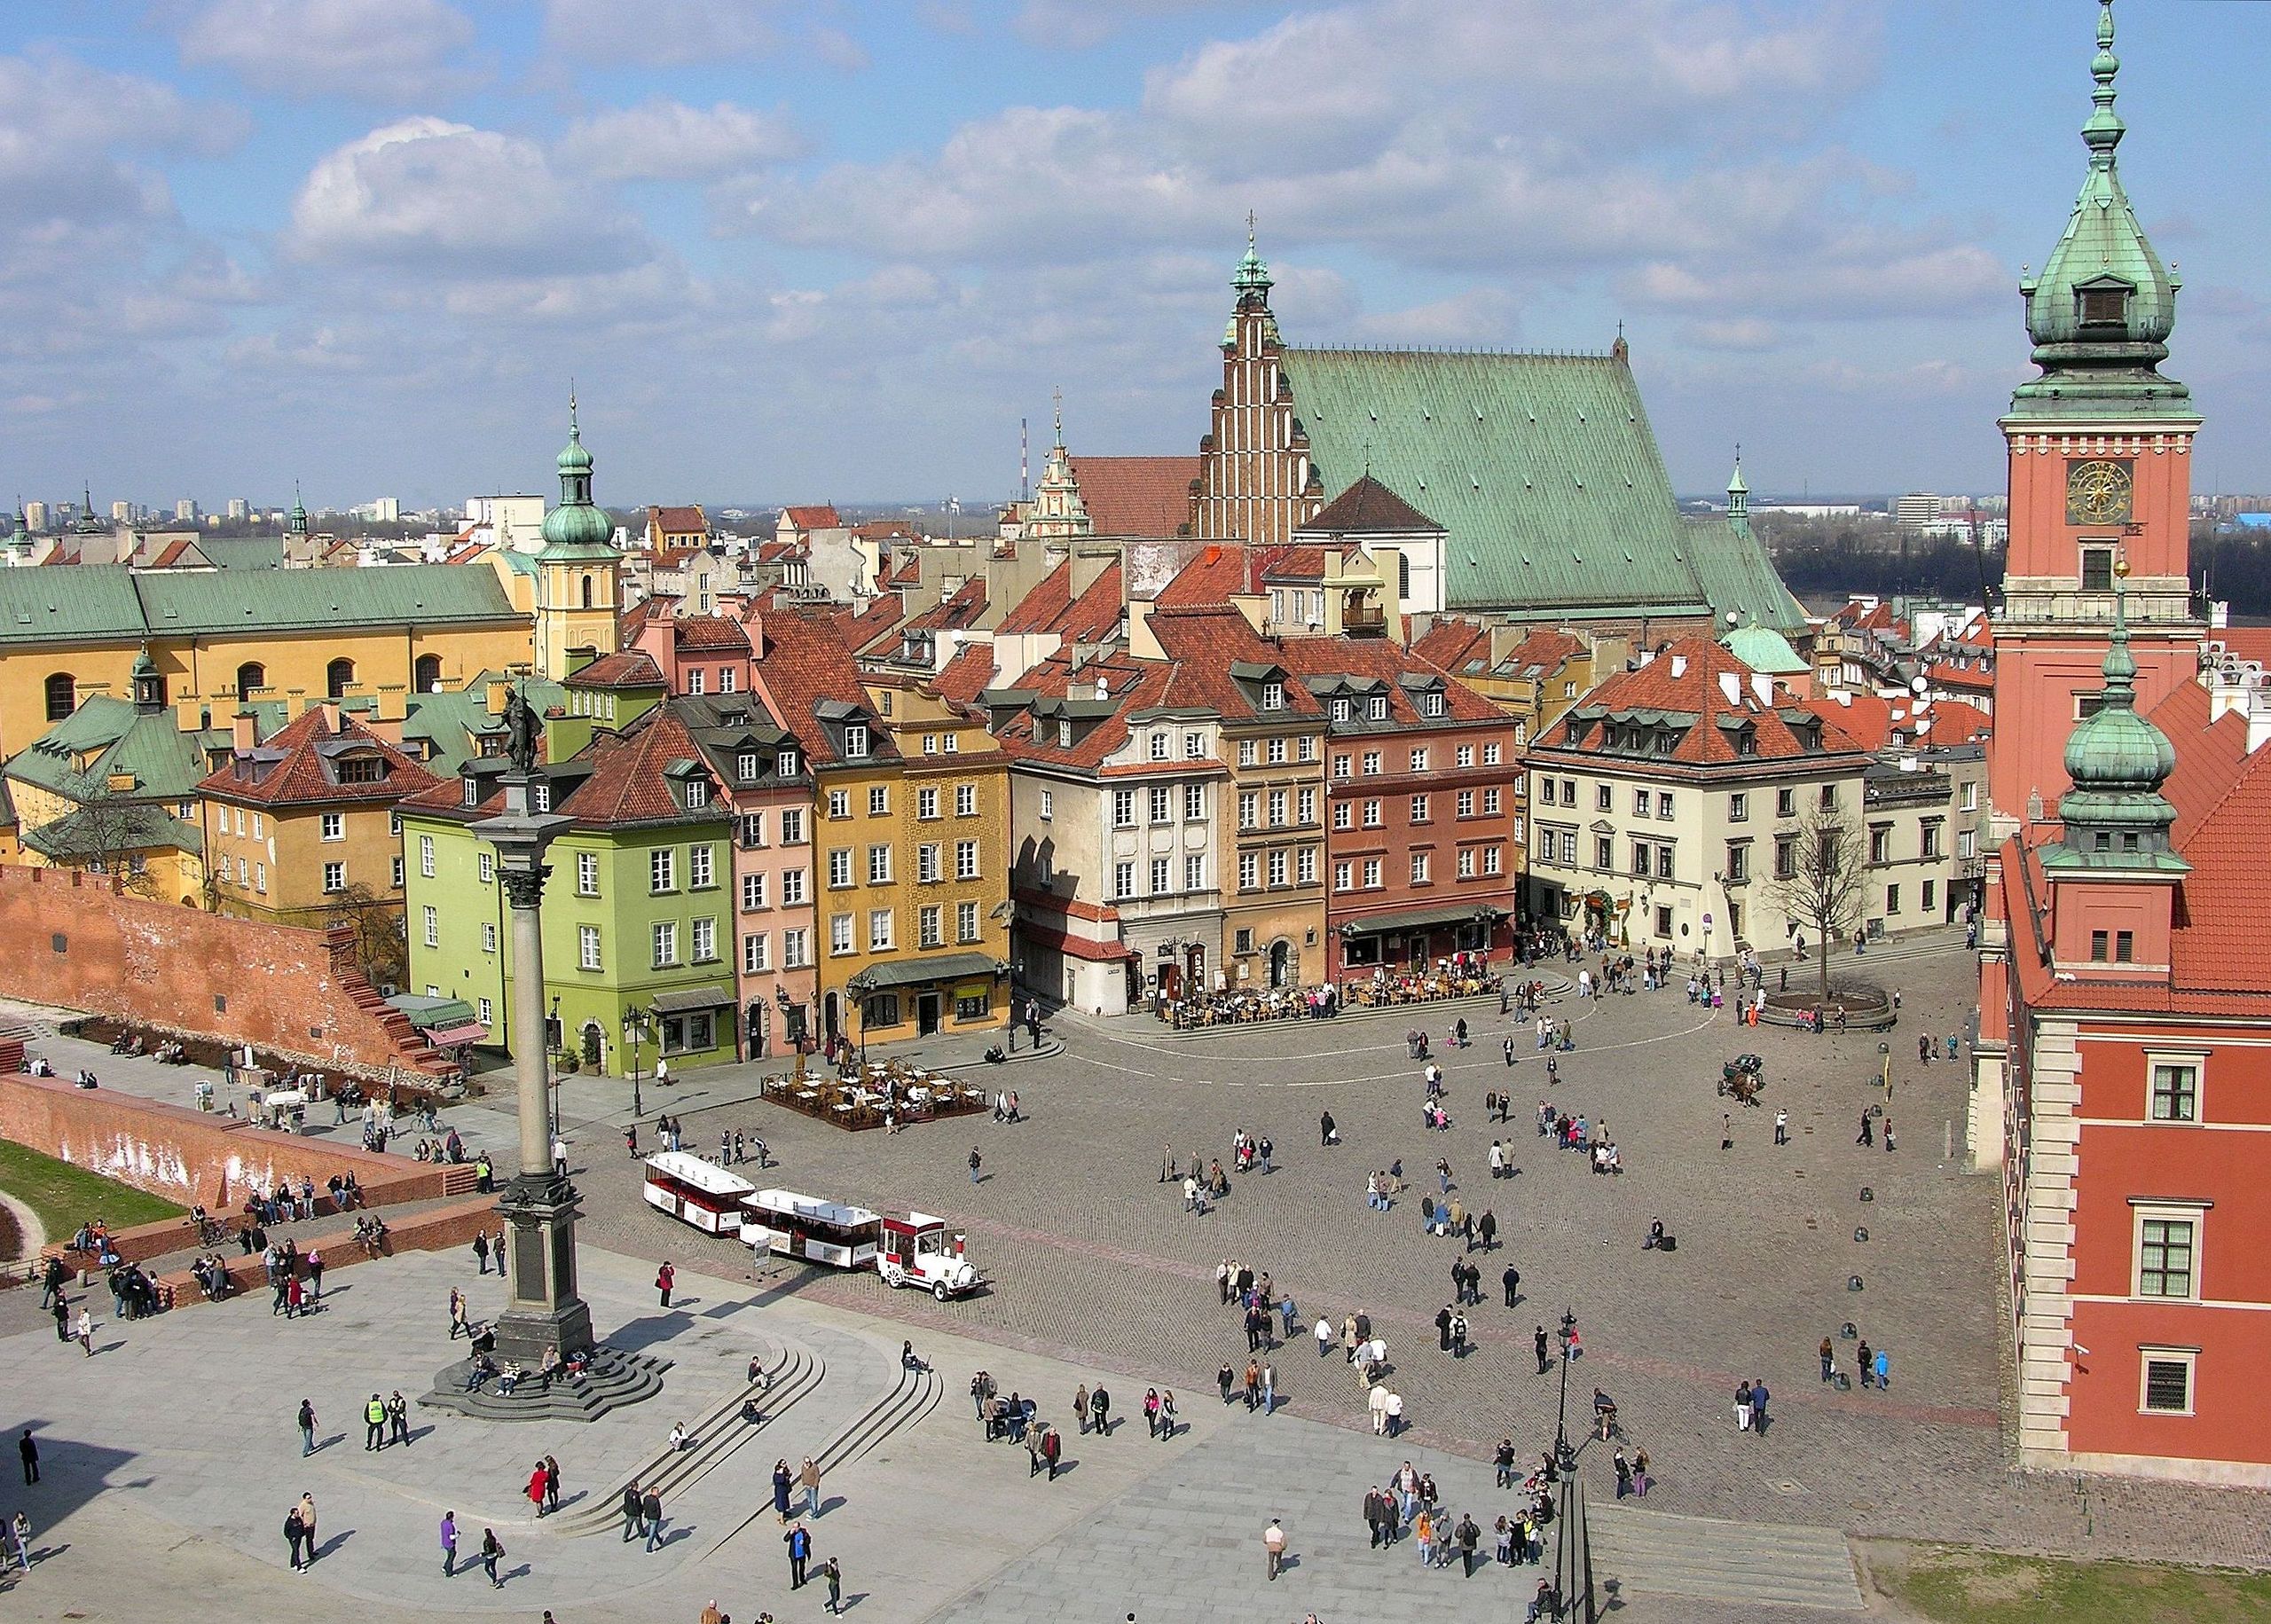 Castle Square in Warsaw viewed from St. Anne's church belfry